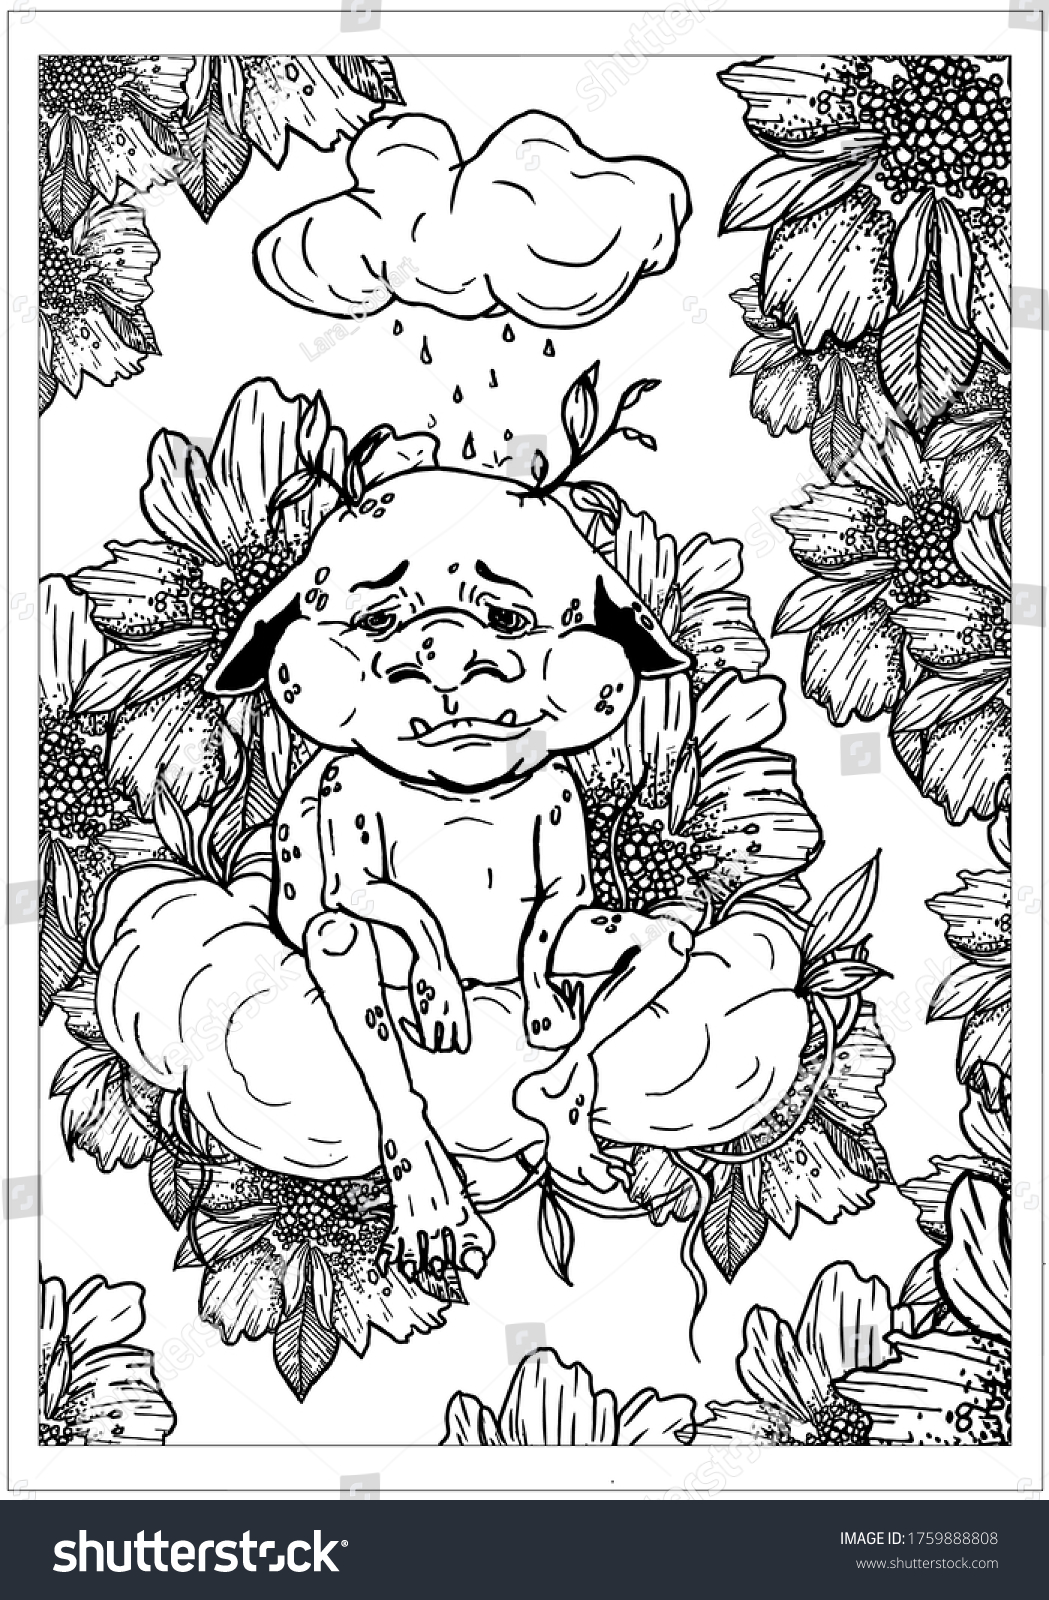 SVG of Fairytale character, tired Troll with sad look, with protruding teeth and drooping ears, with round nose and sprouting leaves from his head, sits on big cloud under rain surrounded by large flowers. svg